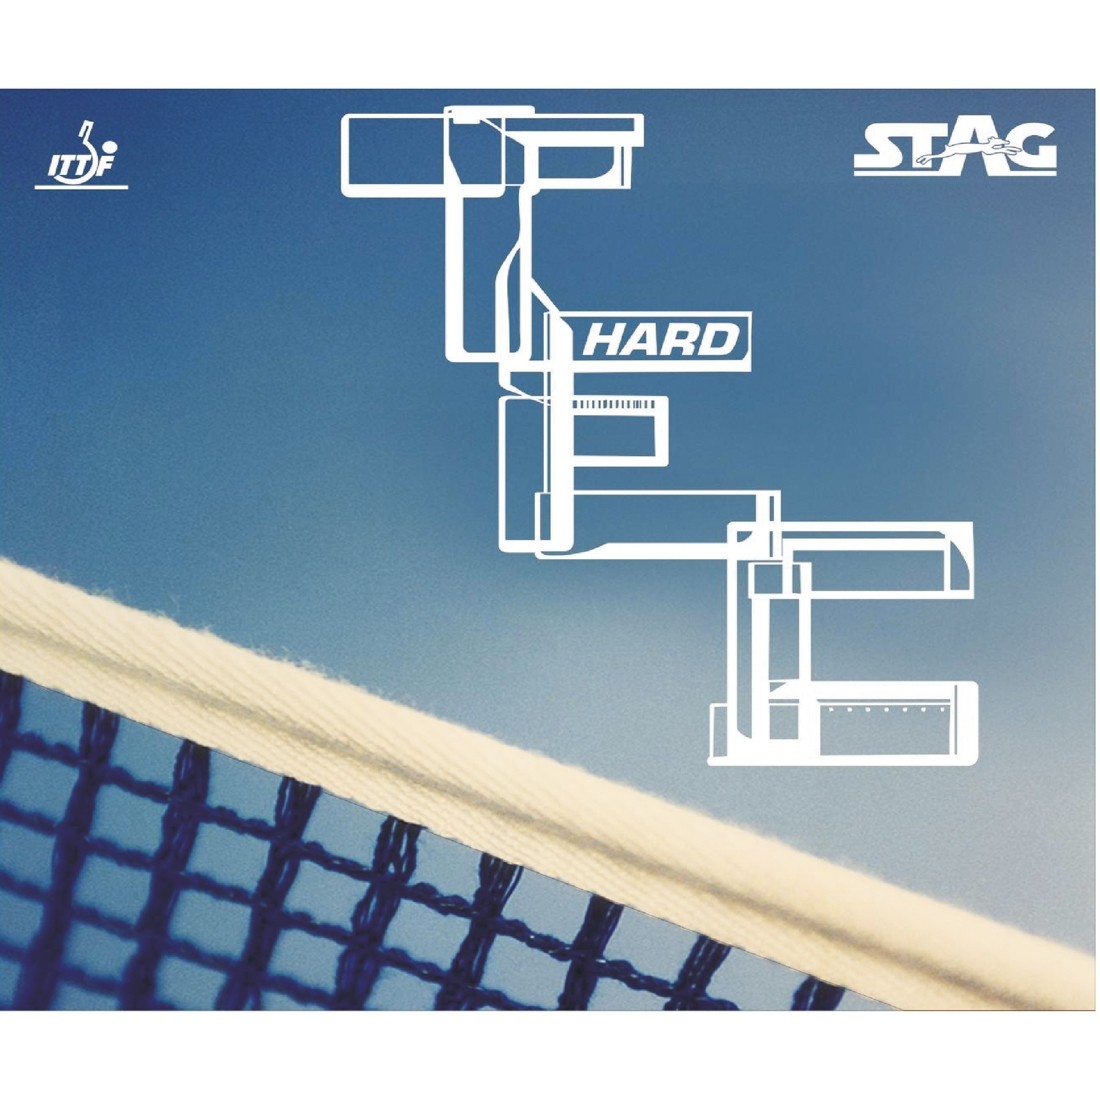 STAG TT RUBBER TEC HARD 1.8MM RED